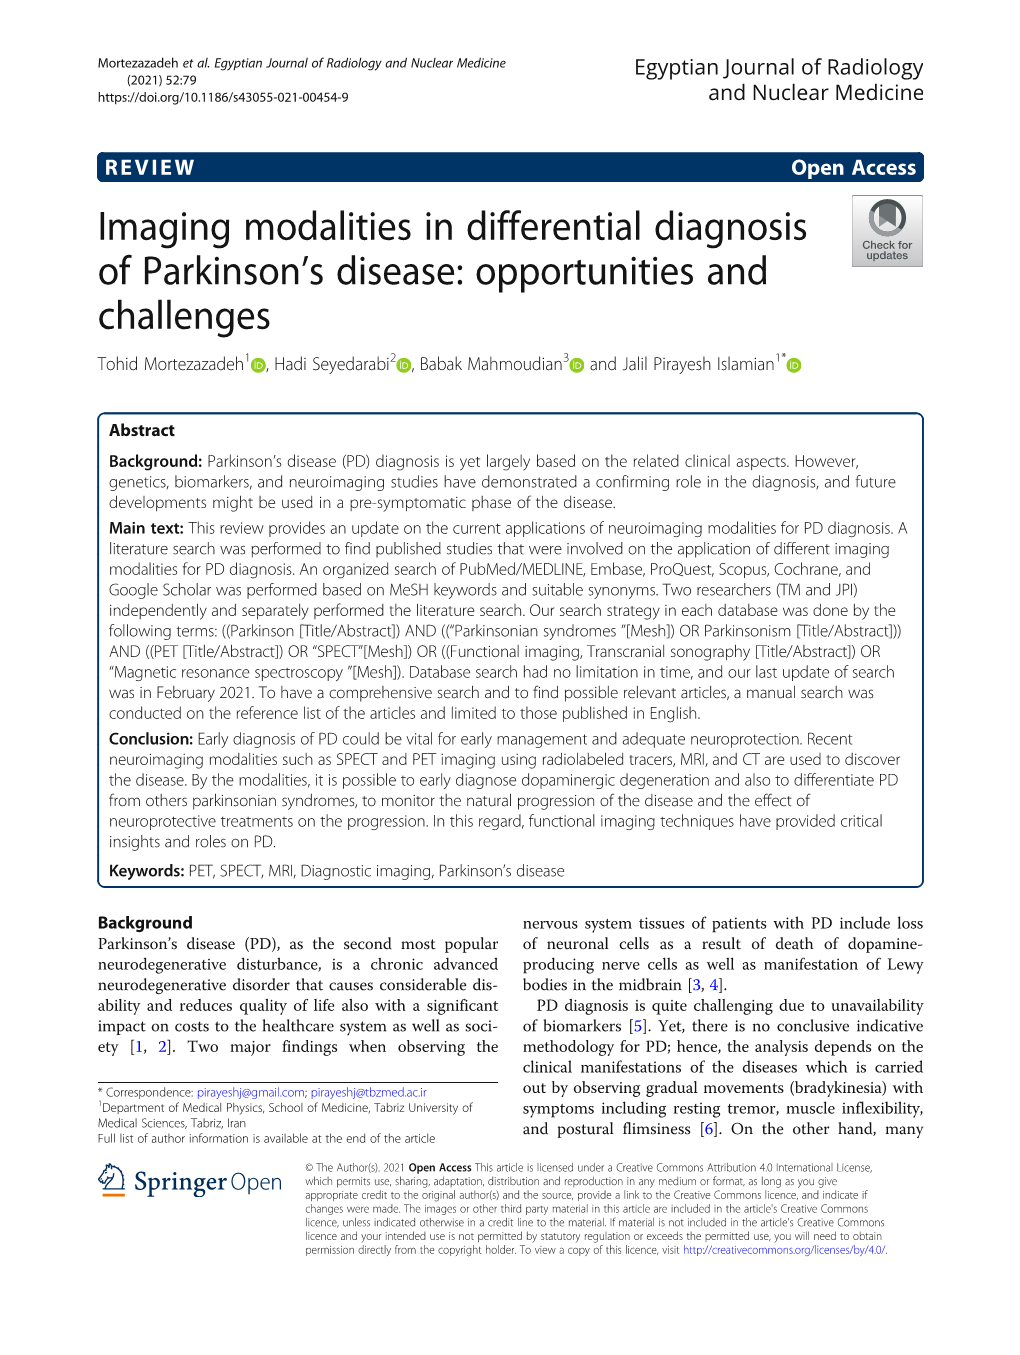 Imaging Modalities in Differential Diagnosis of Parkinson's Disease: Opportunities and Challenges